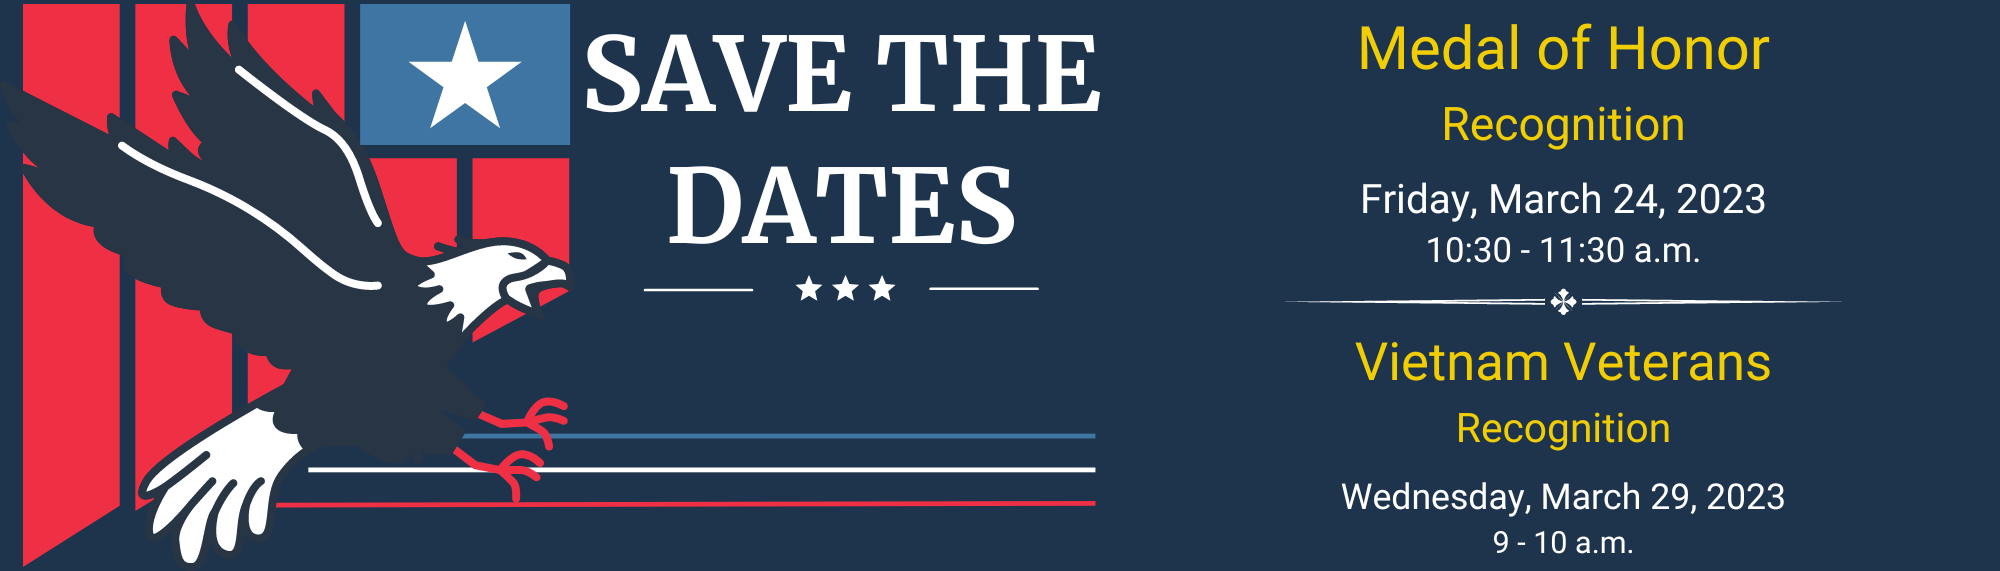 Navy "Save the Date" banner image.